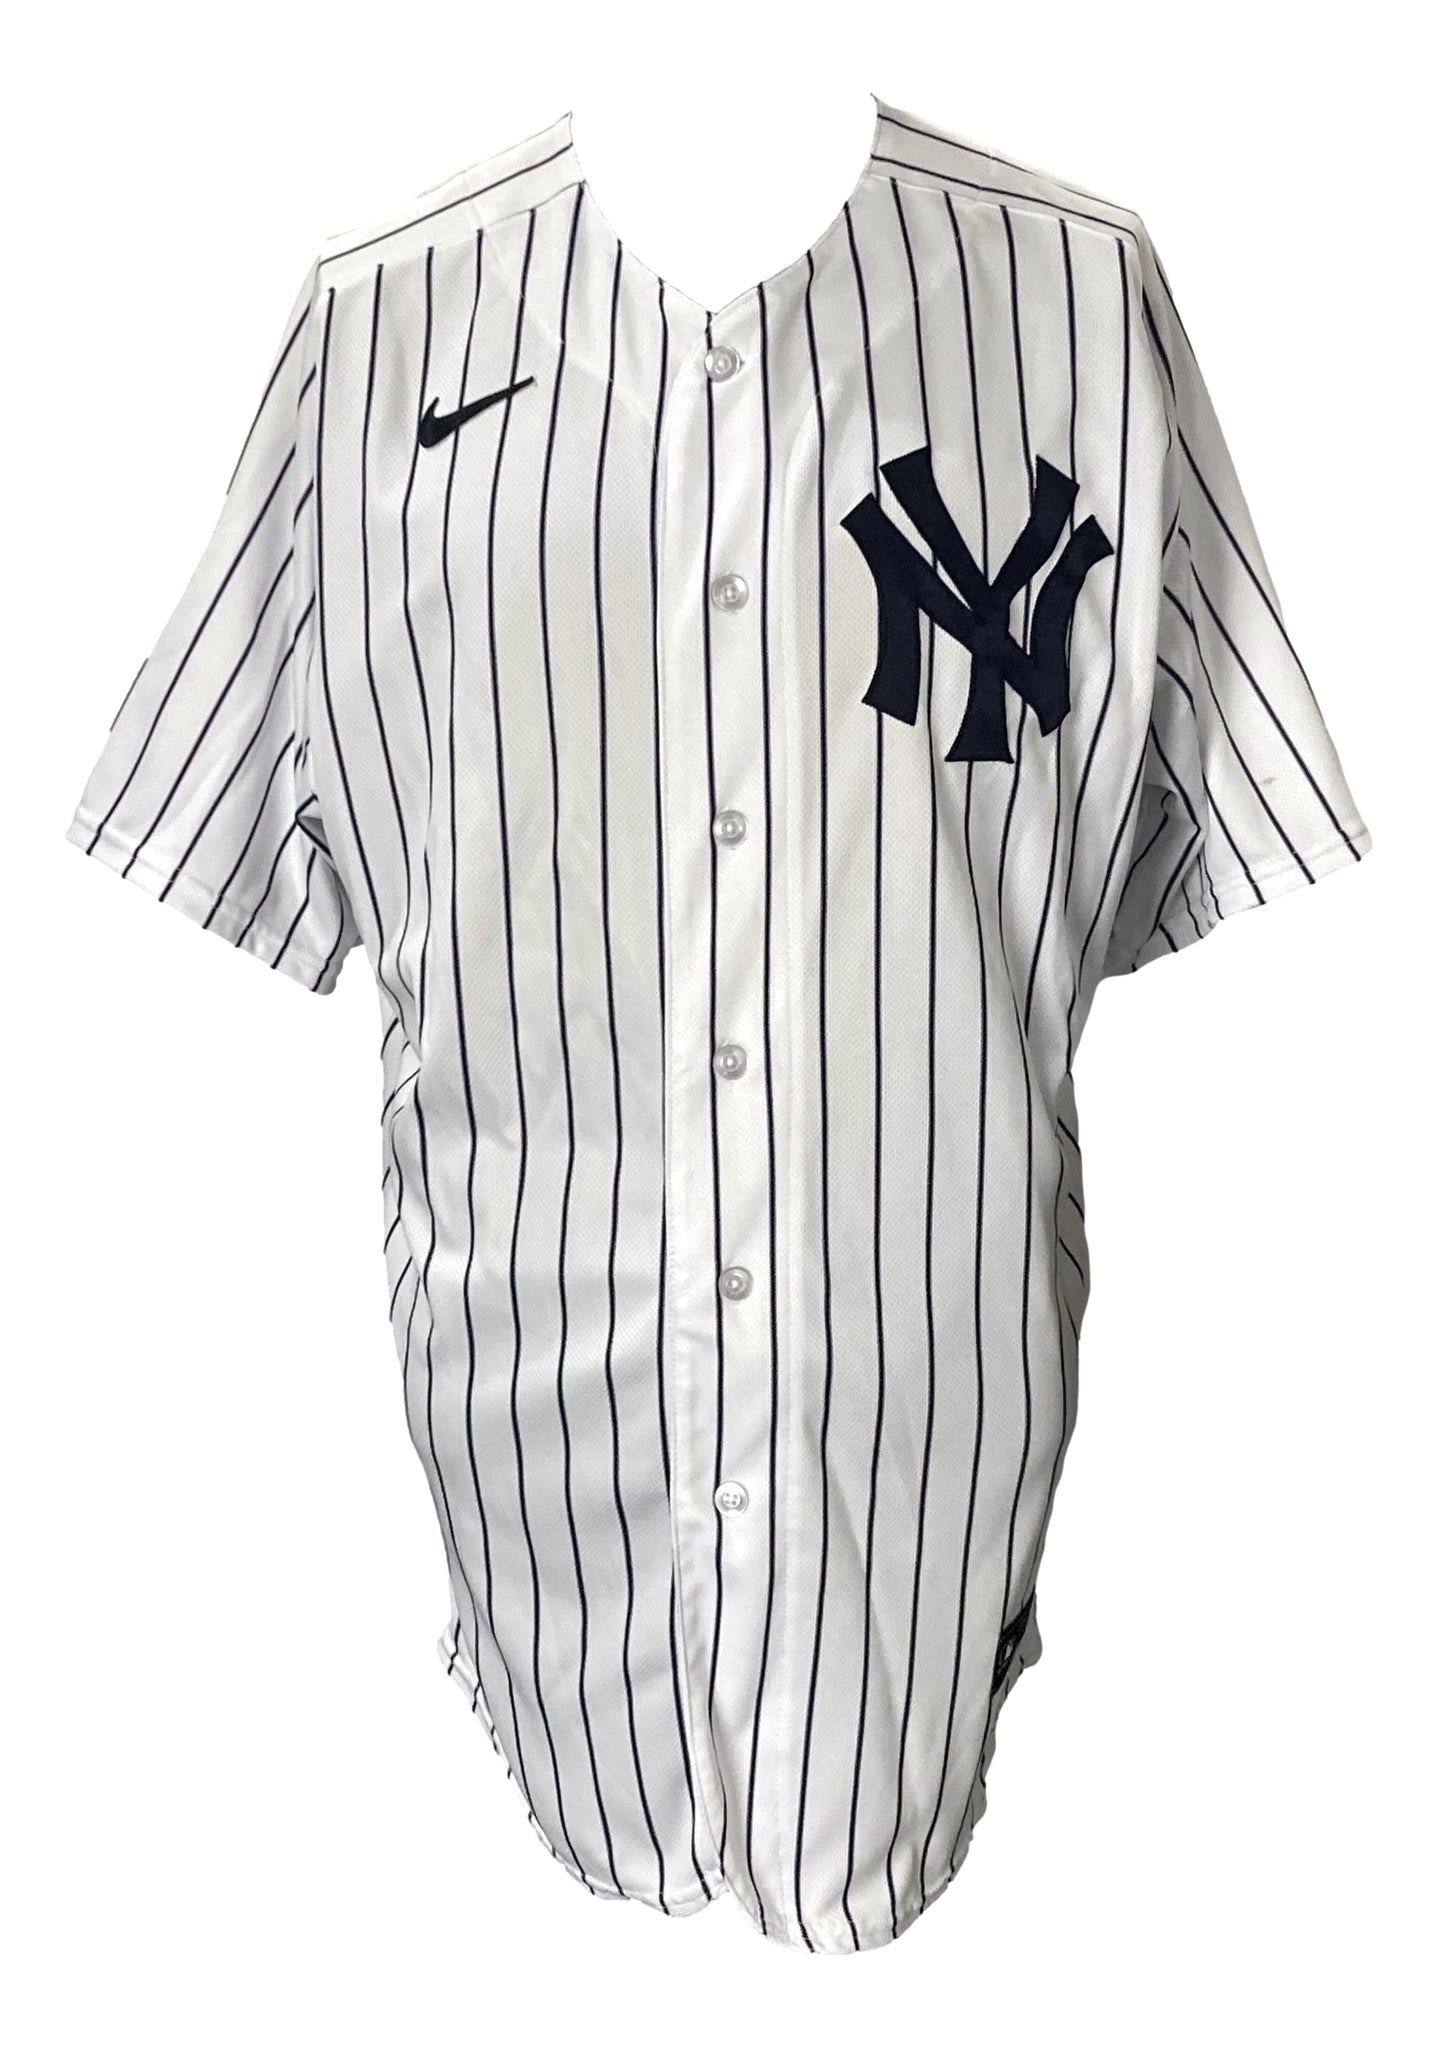 Fanatics Authentic Gerrit Cole New York Yankees Game-Used #45 White Pinstripe Jersey vs. Boston Red Sox on August 19, 2023